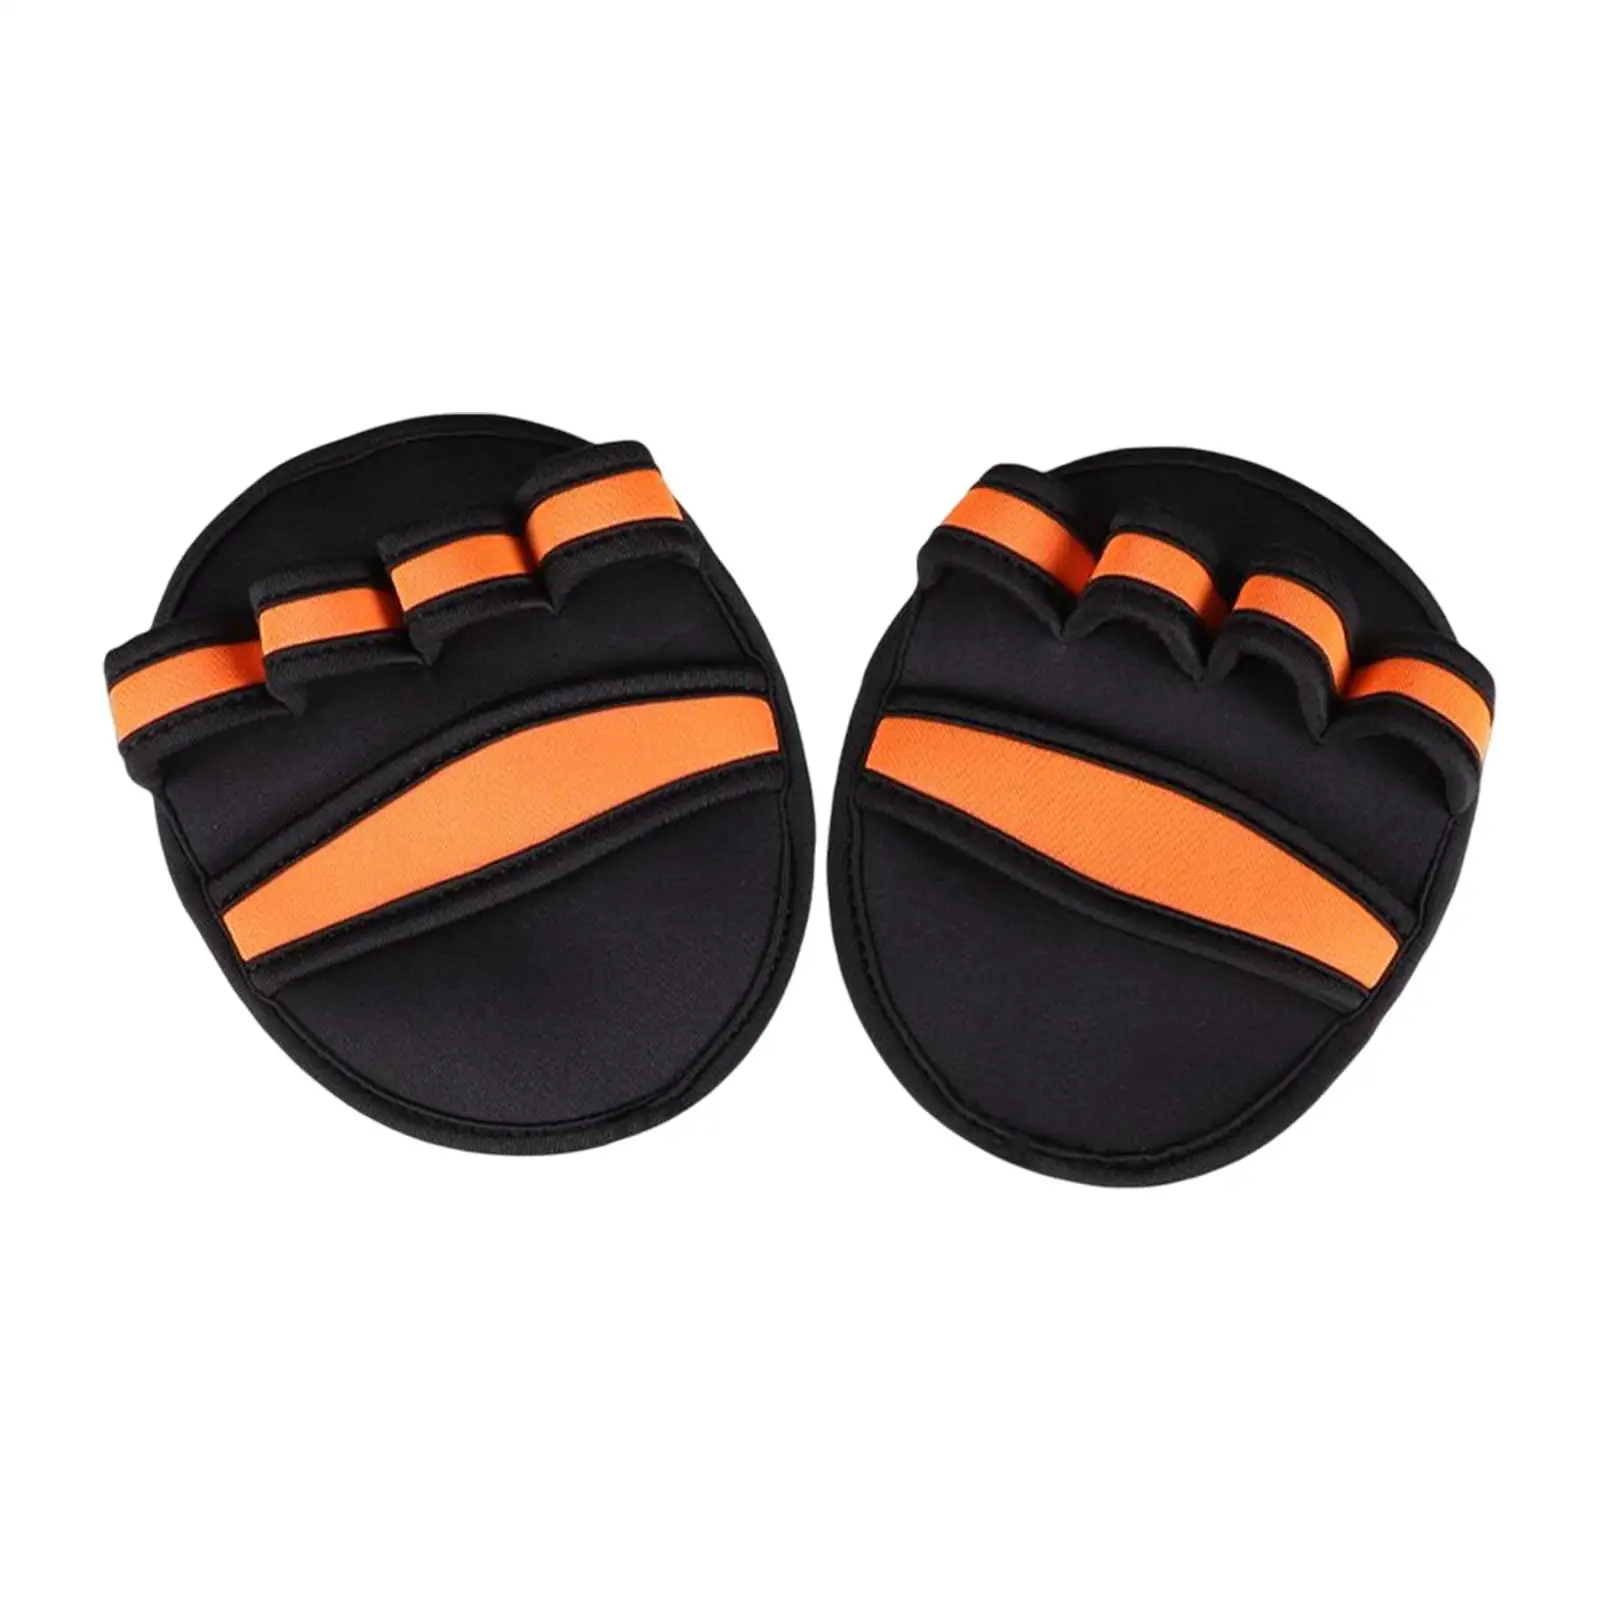 Gym Grip Pads Hand Protector Pad Men and Women Non Slip Exercise Gloves